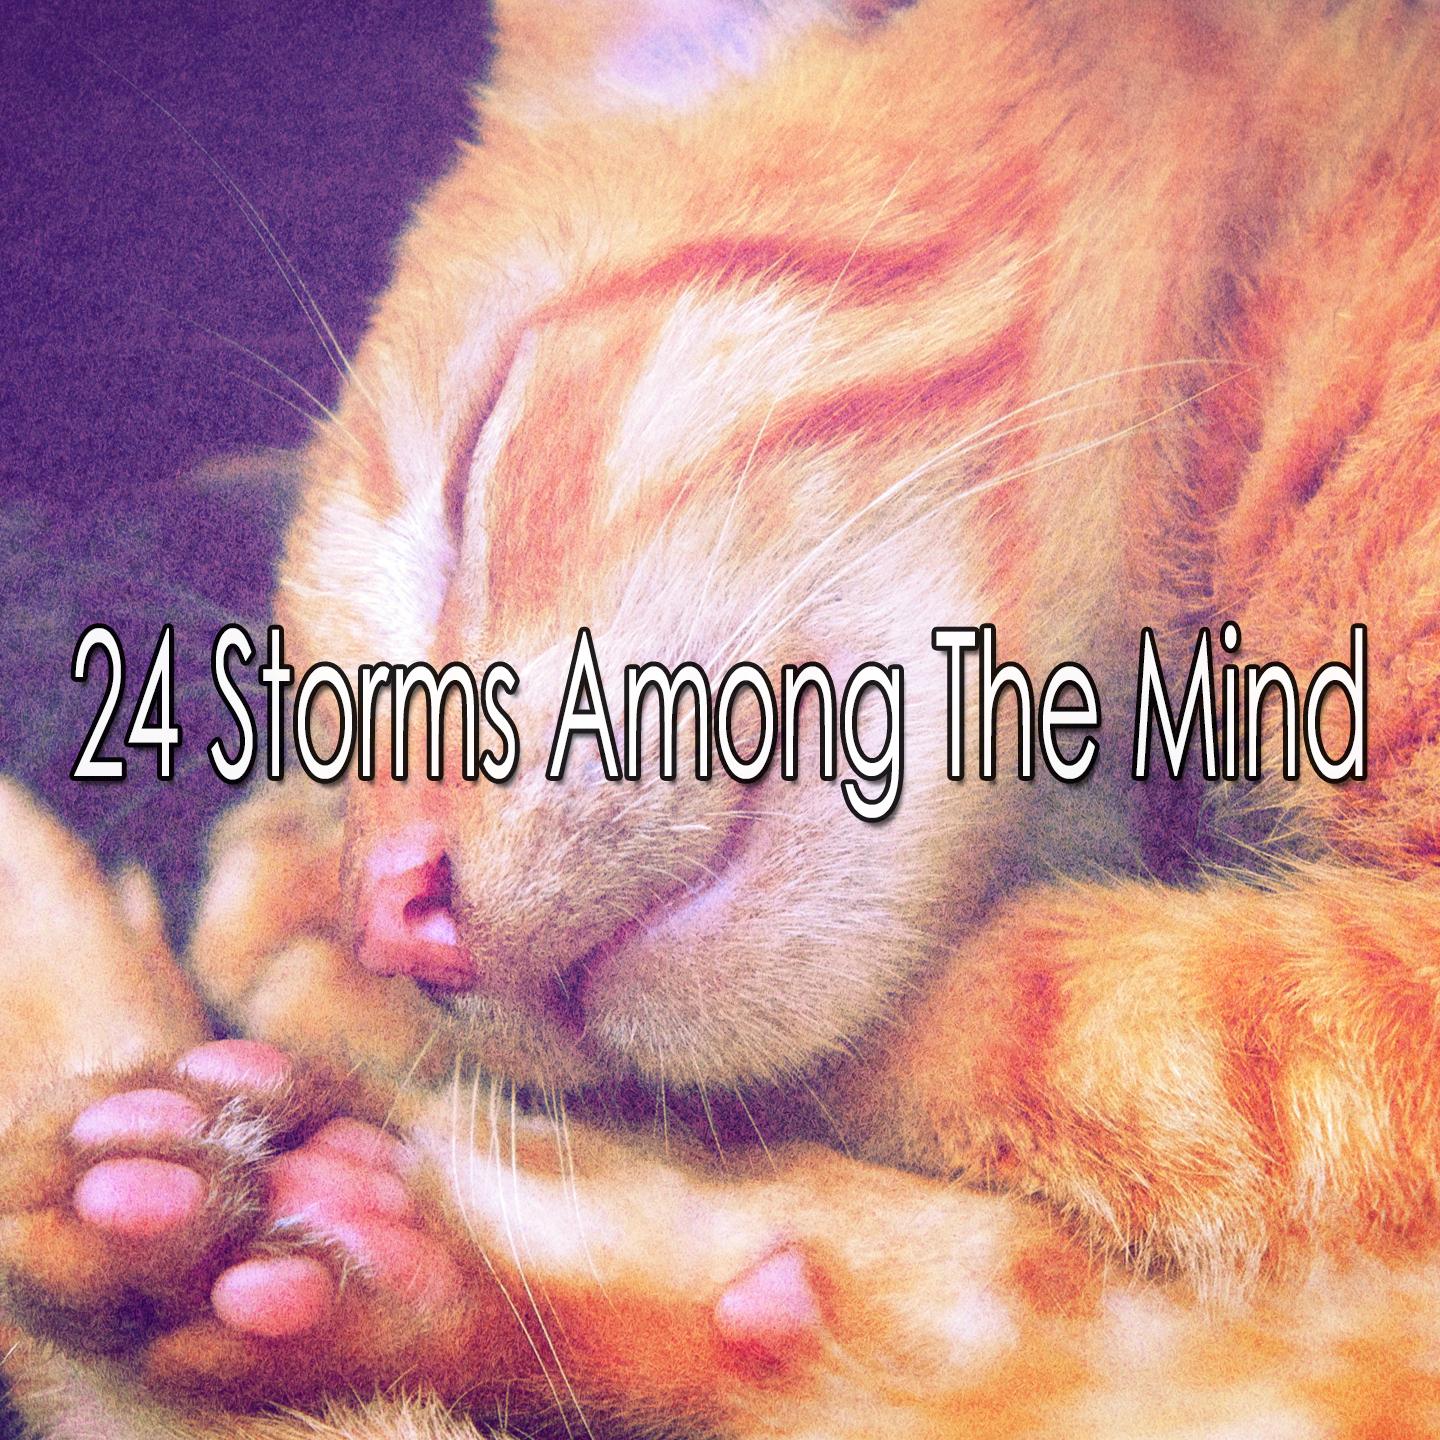 24 Storms Among the Mind